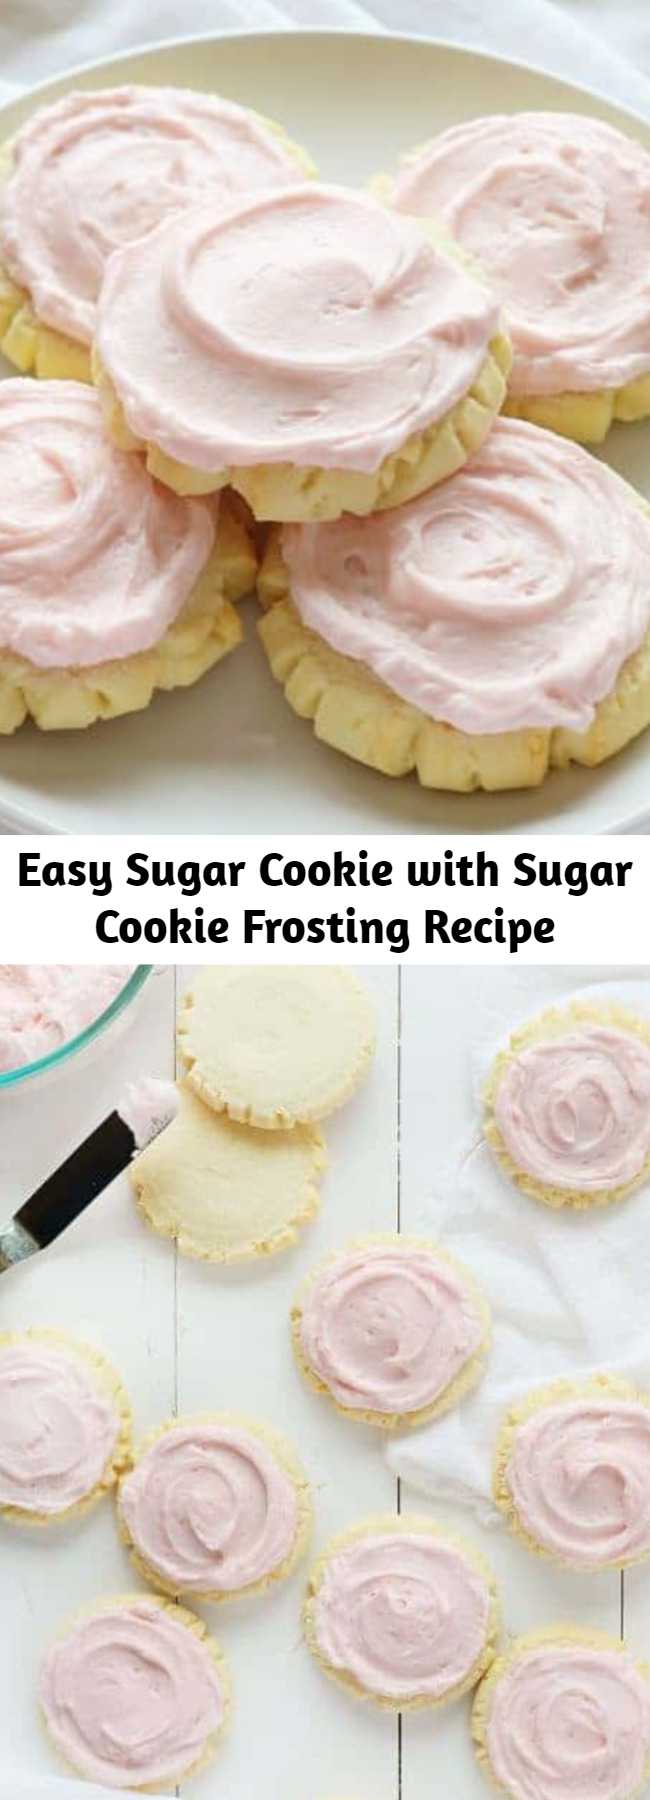 Easy Sugar Cookie with Sugar Cookie Frosting Recipe - These beautiful cookies are the BEST tasting sugar cookie you will ever try!! Extensively tested and approved! Perfect pink frosting swirls paired with the best basic sugar cookie… it’s SO GOOD! If you are looking for the perfect cut-out Sugar Cookie Recipe, try this one! #sugarcookies #sugarcookierecipe #sugarcookiefrosting #swigcookie #pinkfrosting